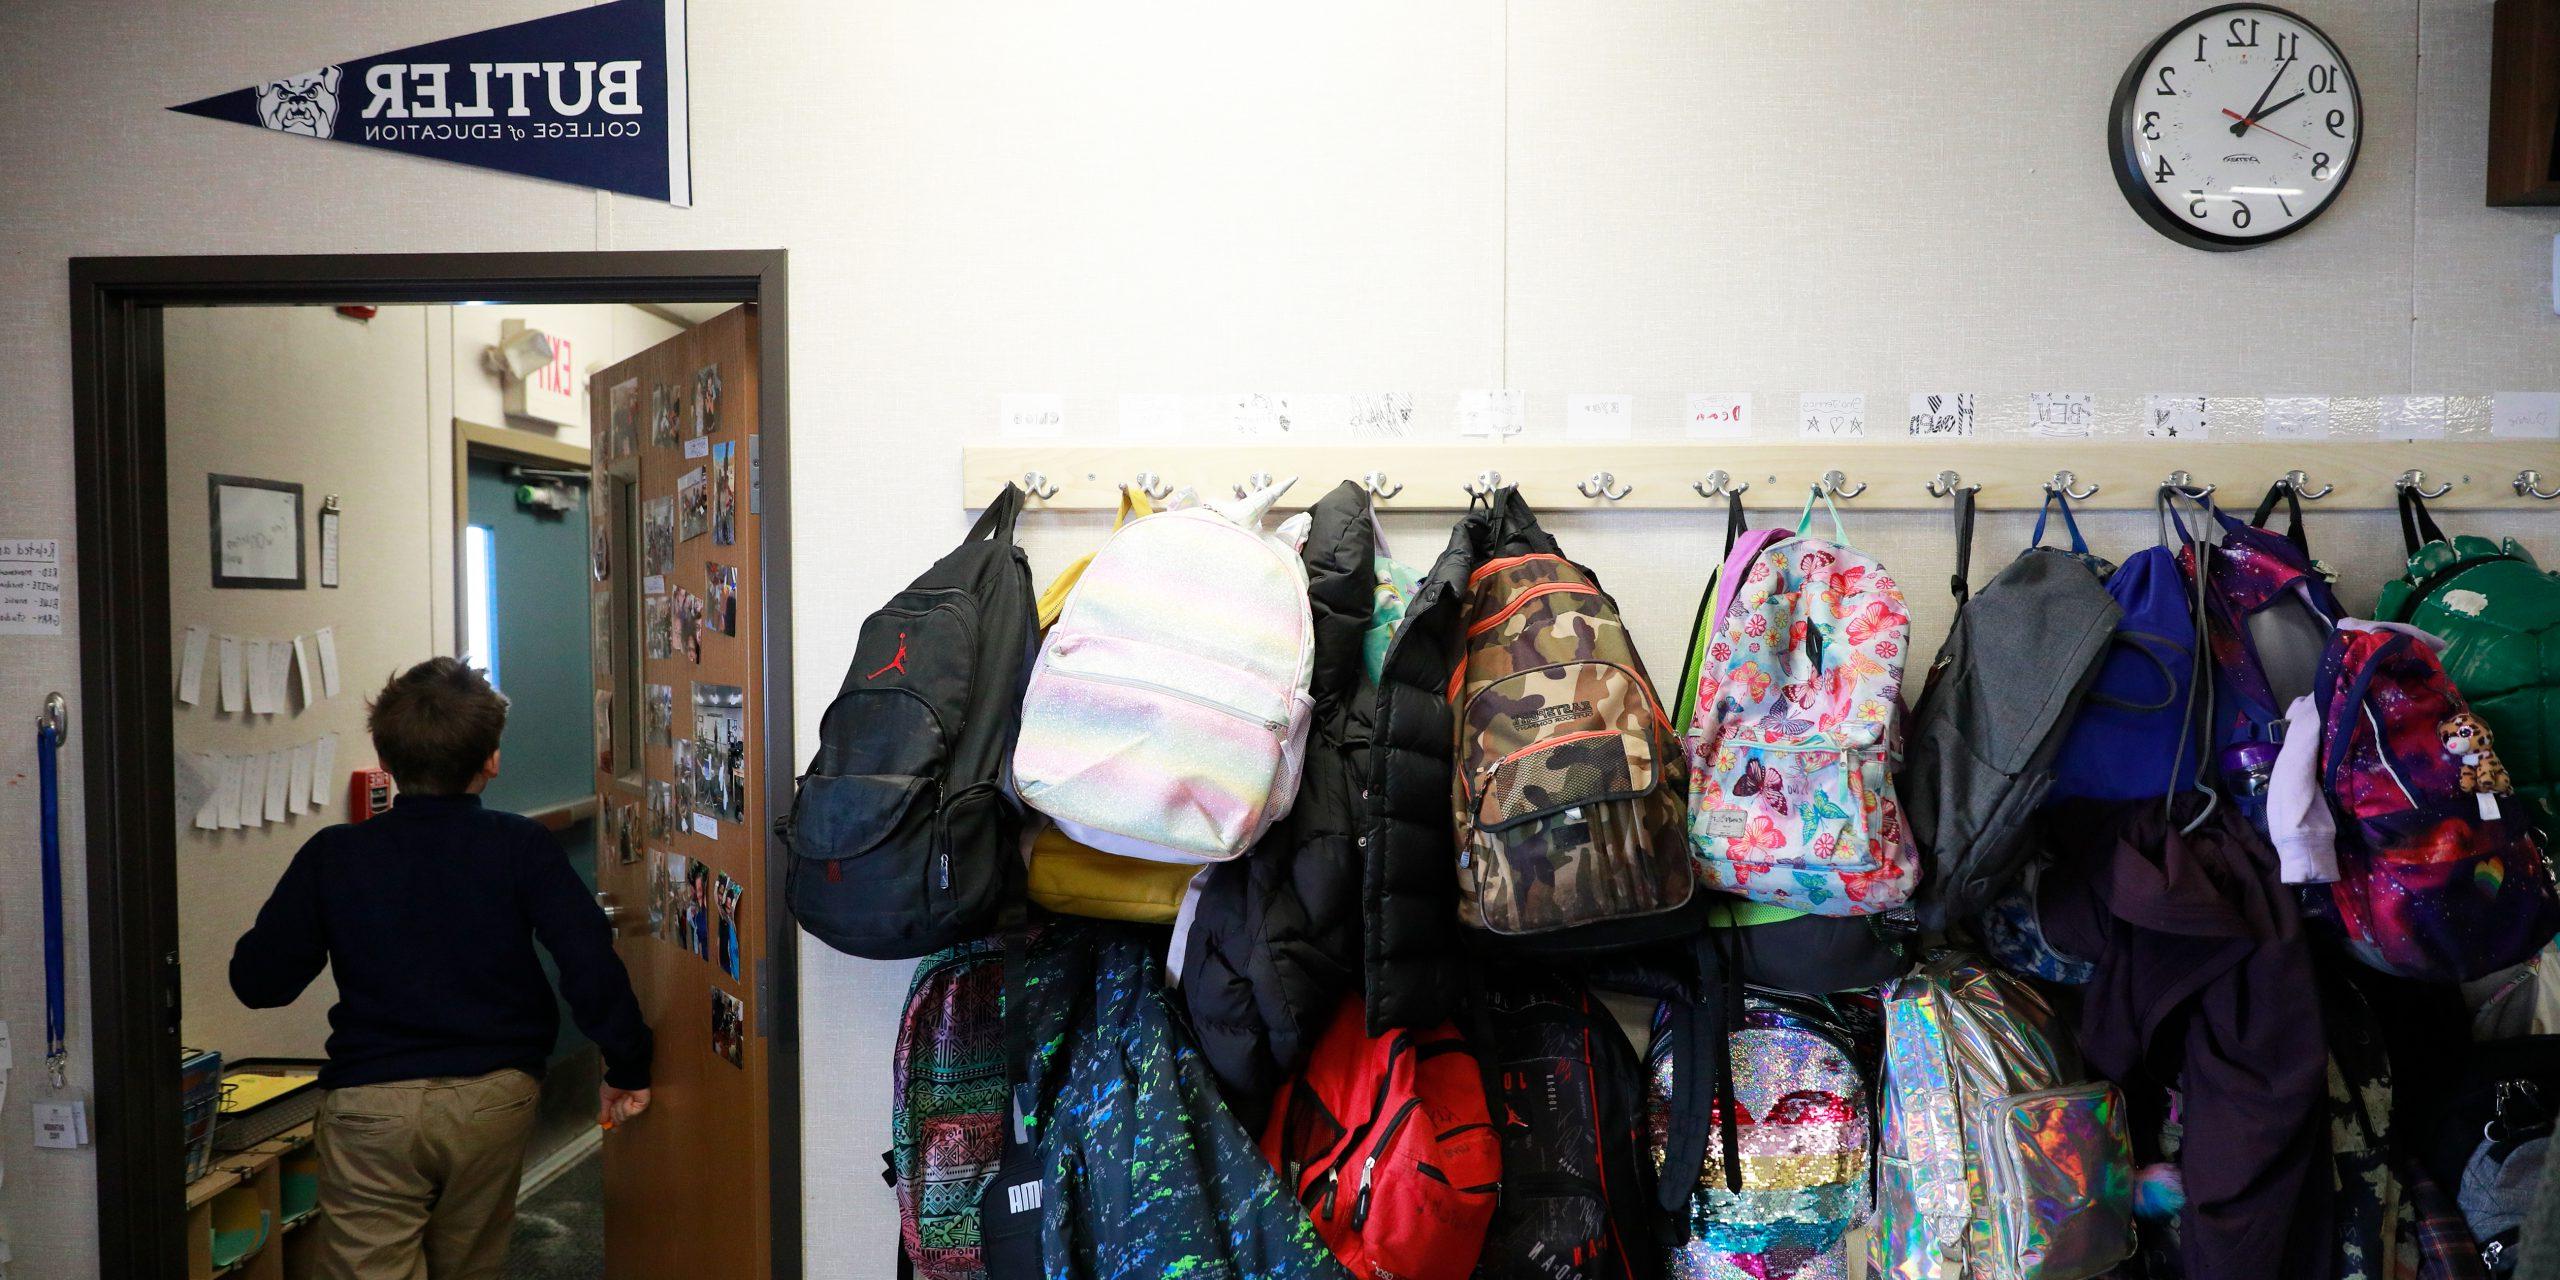 Backpacks at a Butler Lab School